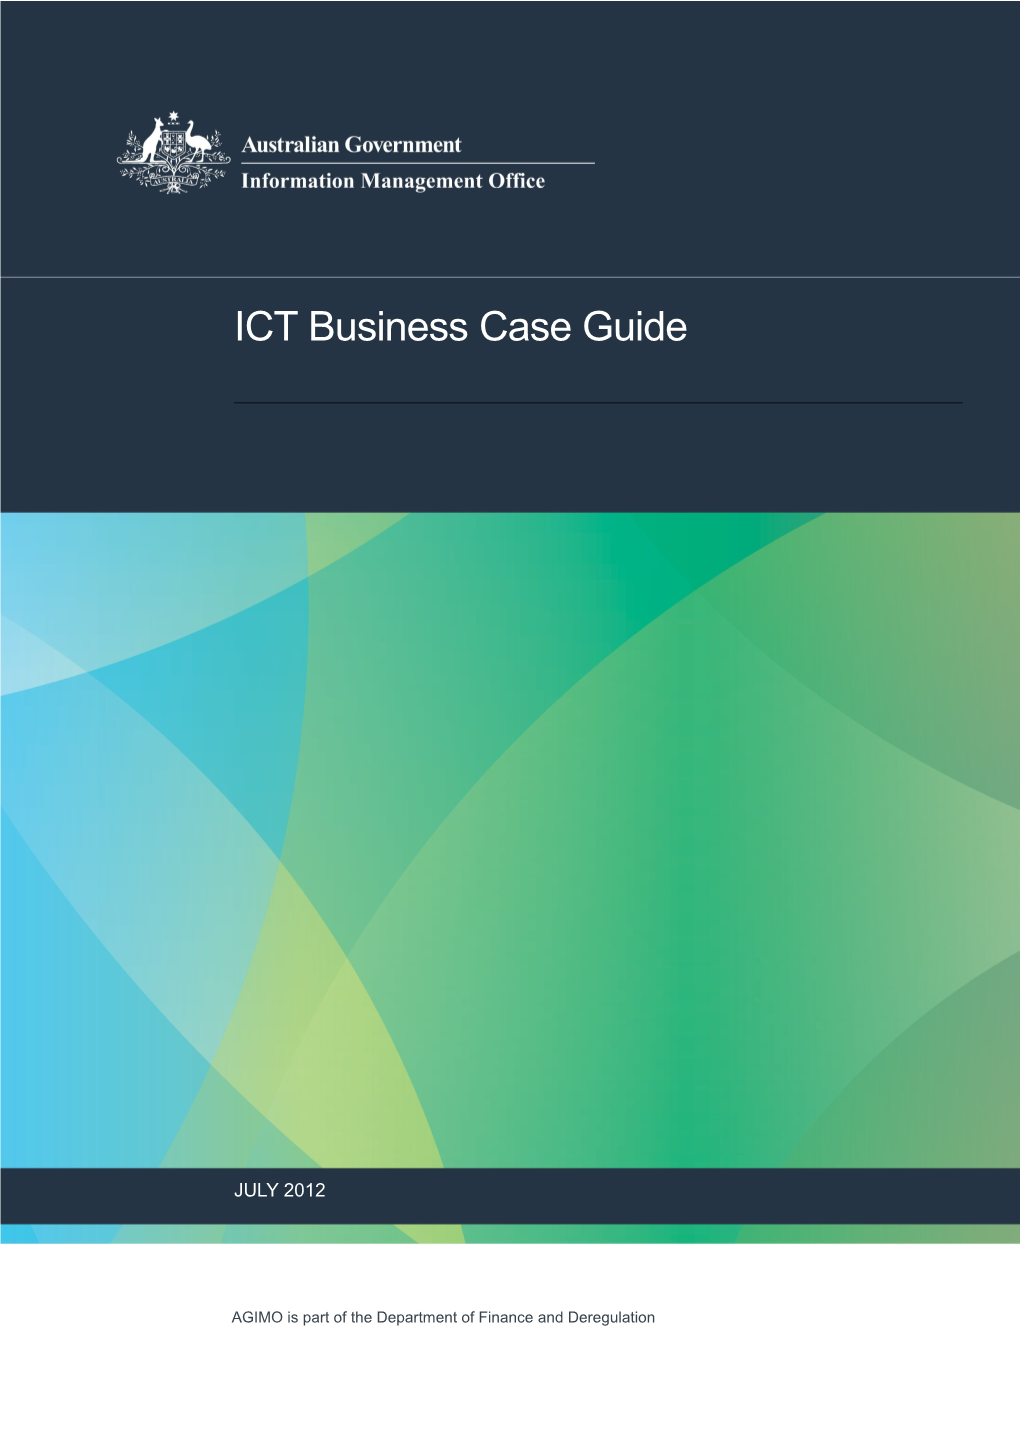 ICT Business Case Guide